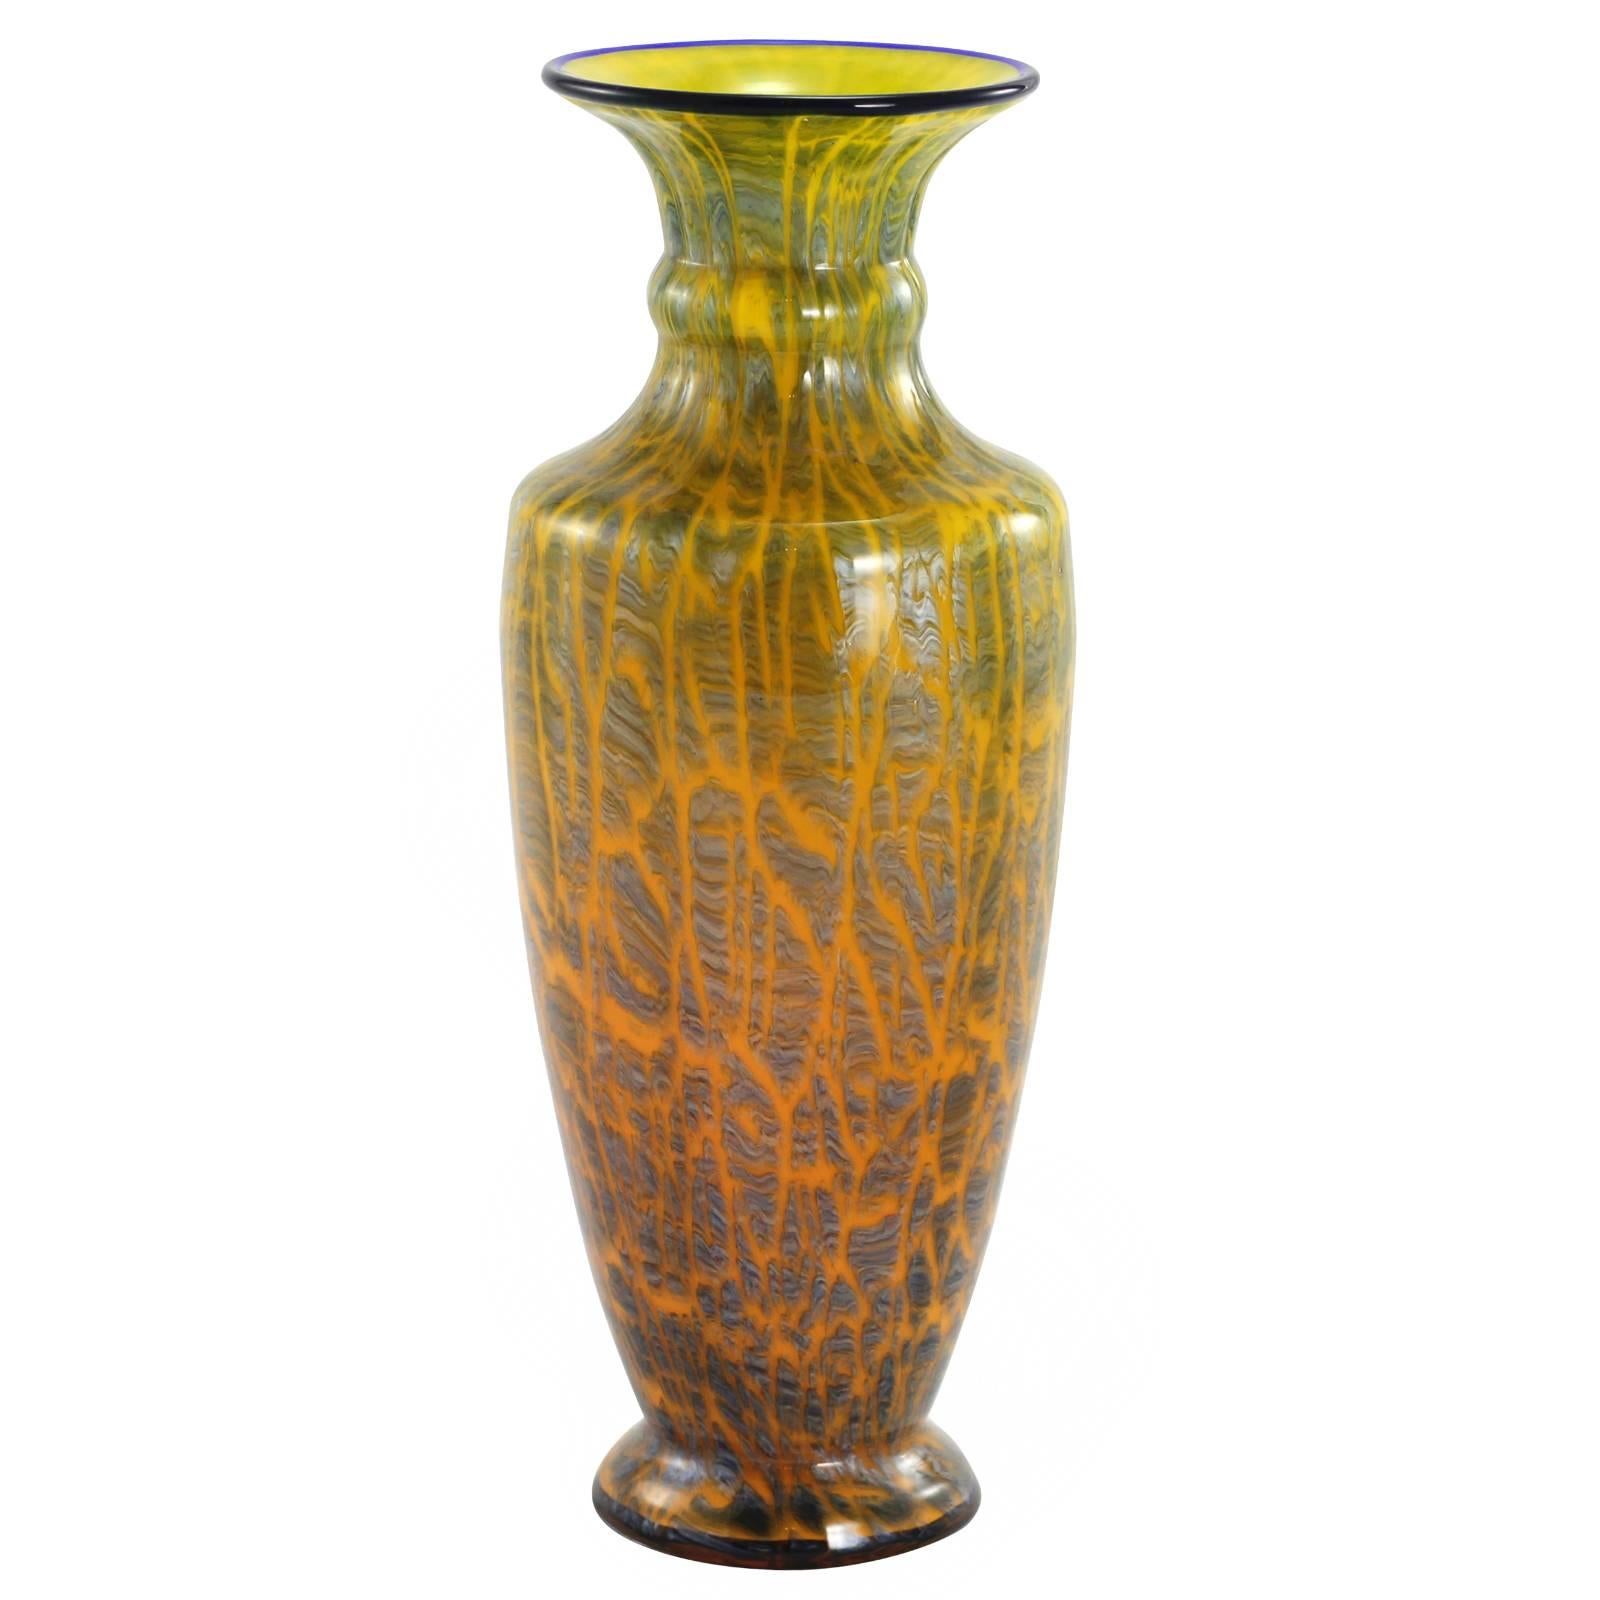 An early 20th century Bohemian art deco glass vase by famed European glassmakers, Loetz. Completed with a subtle orange to yellow ground, and cobalt blue rim; the vase is decorated with an overlaid steel grey crackle layer from the 'Ausfuehrung 134'